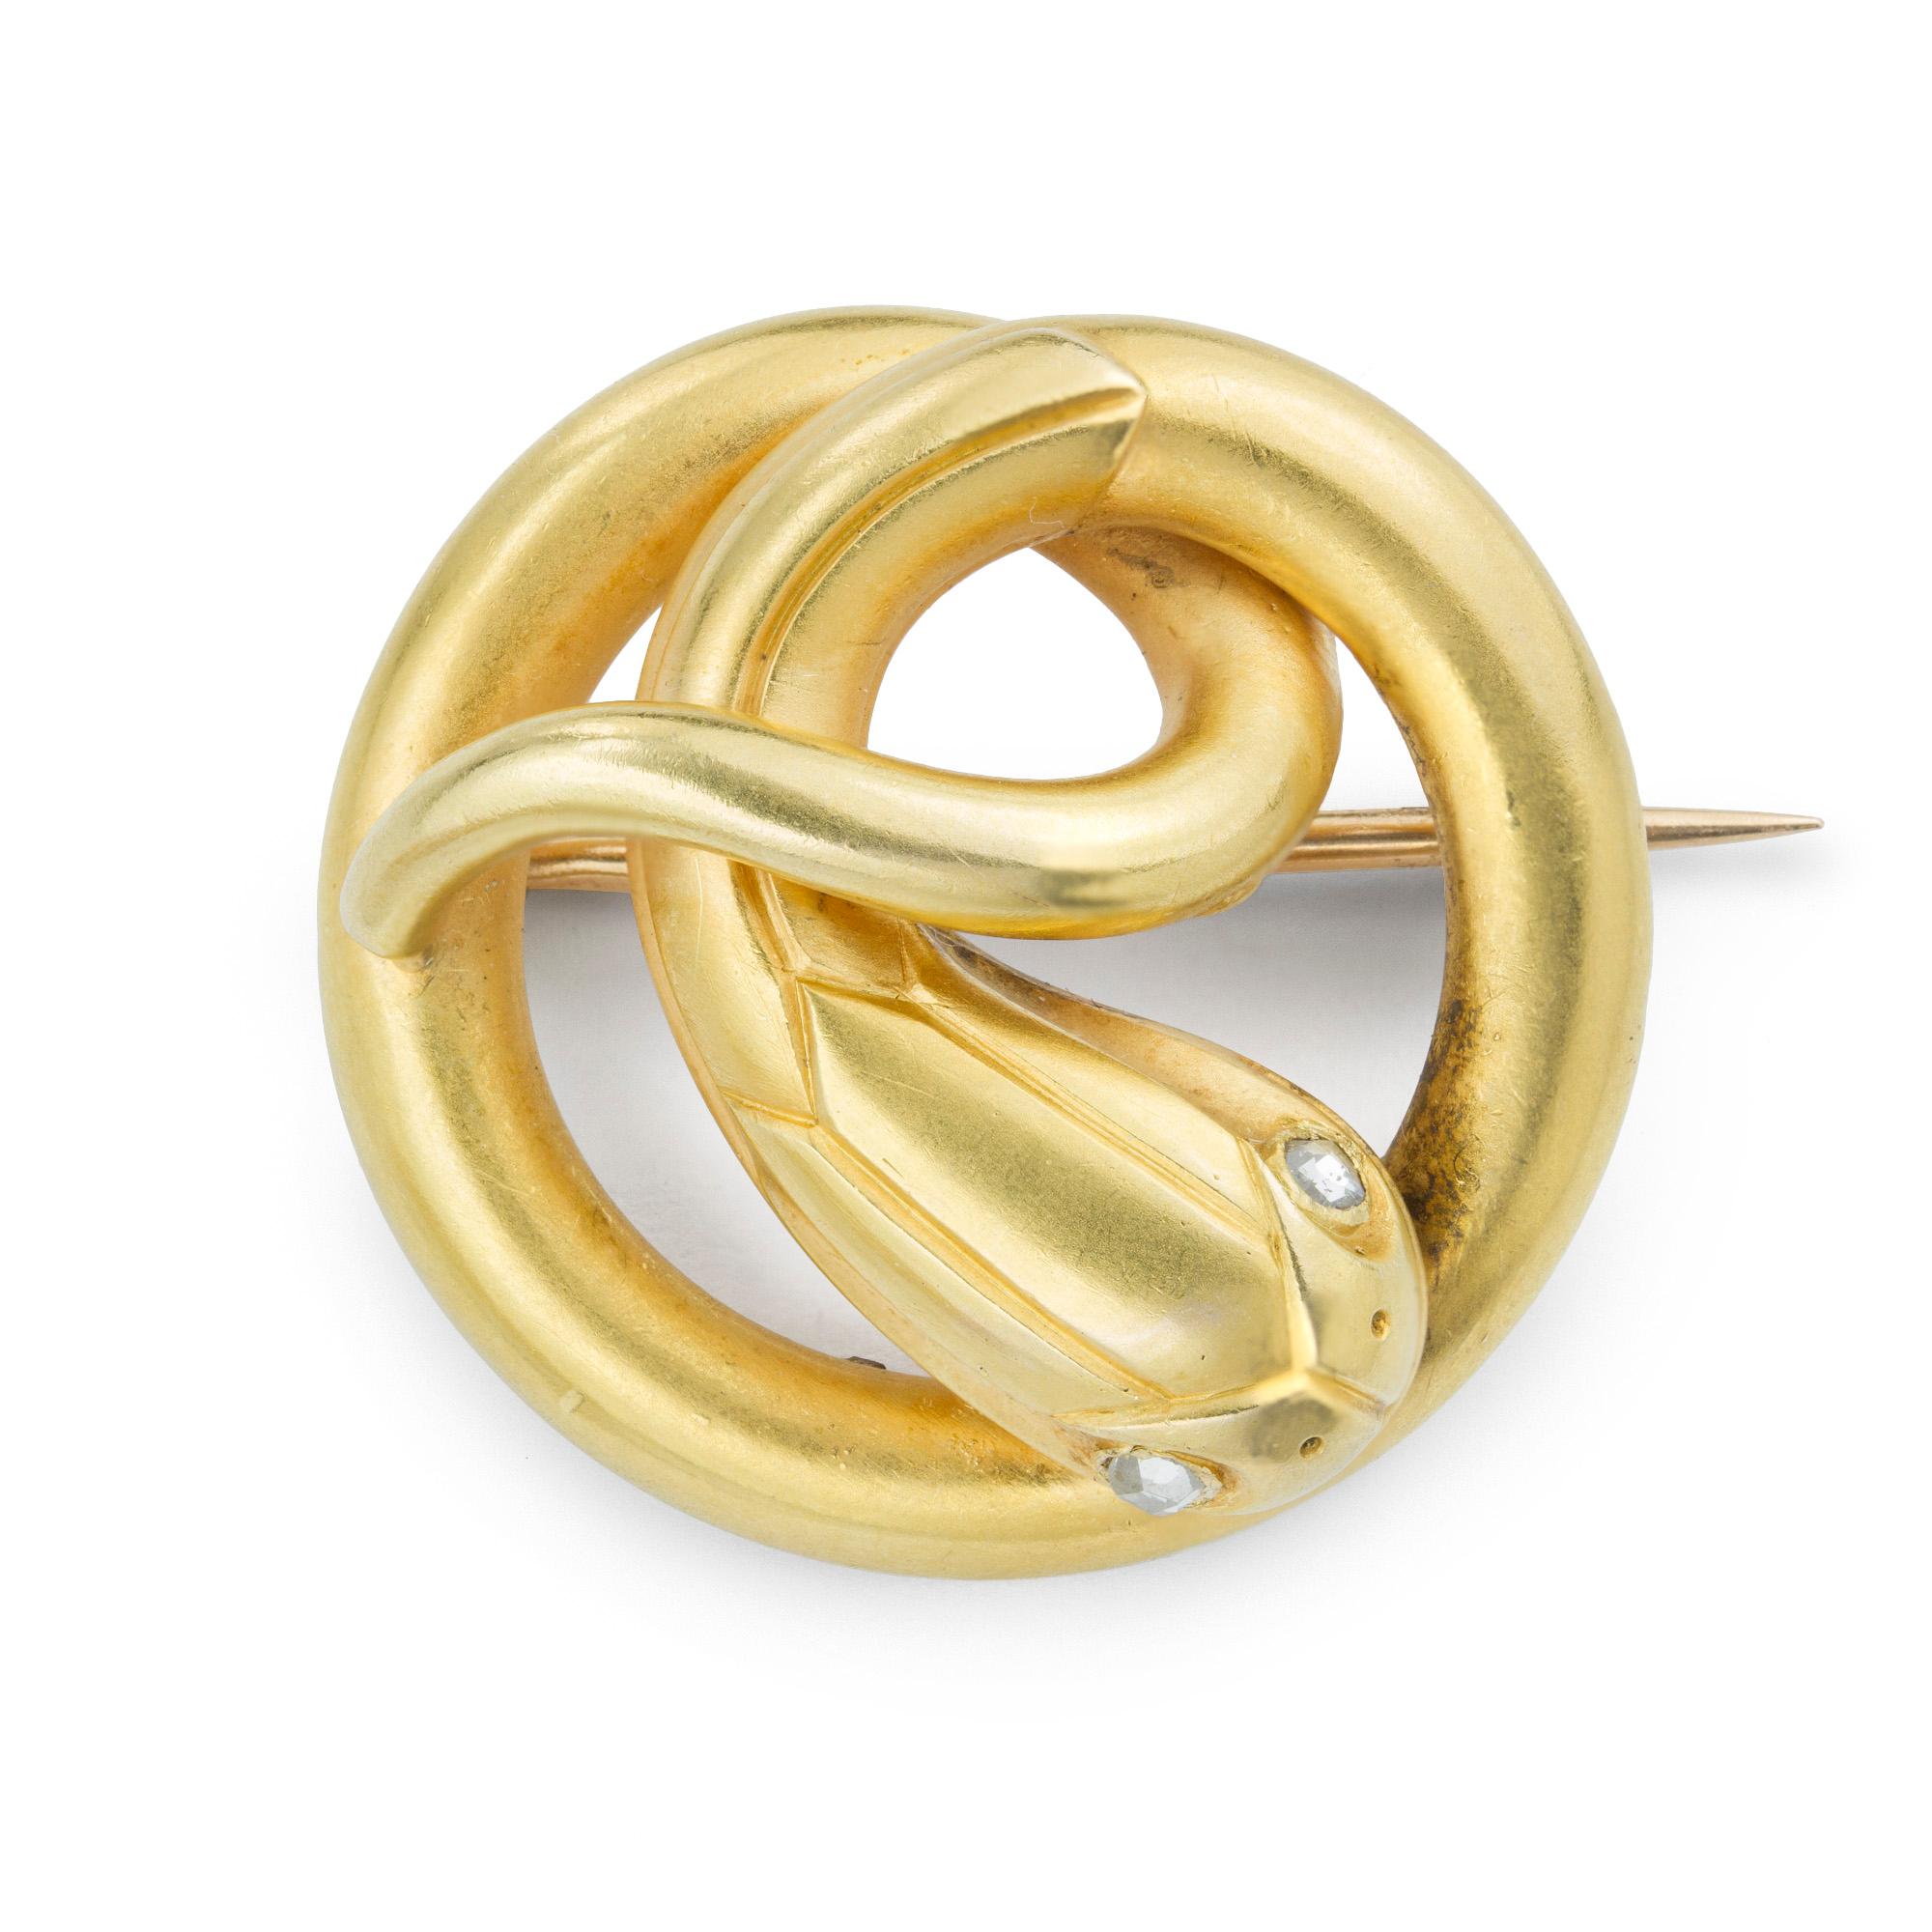 A Second Empire yellow gold and diamond serpent brooch, in the form of an entwined serpent, the head with rose-cut diamond-set eyes, all in 18 carat yellow gold mount, with single brooch pin to reverse bearing French Assay marks, attributed to